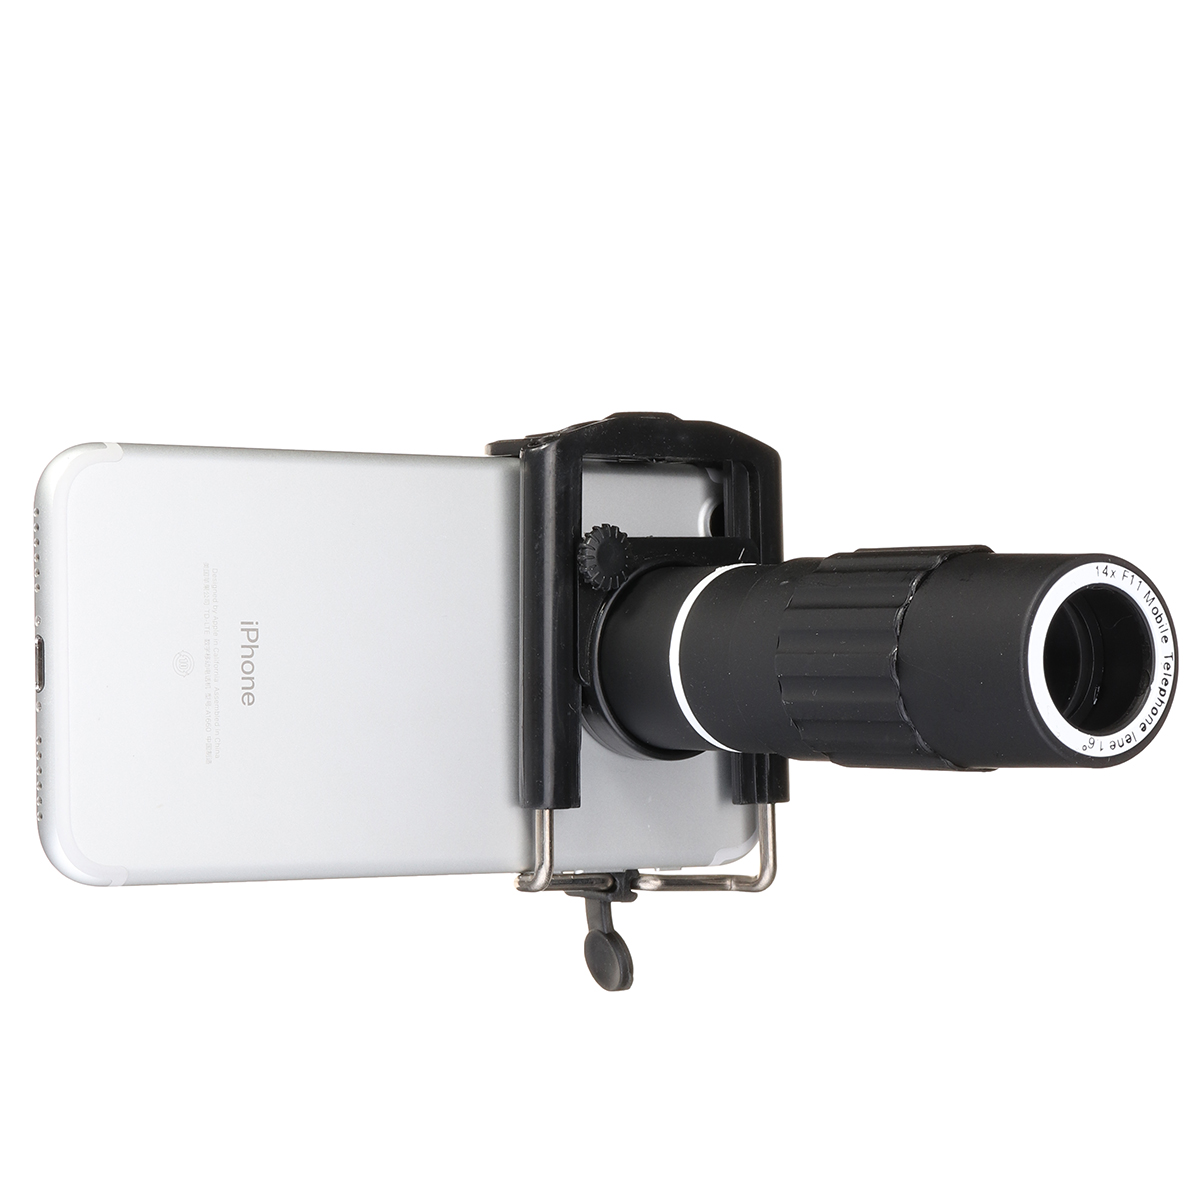 14X50-Zoom-Optical-HD-Lens-Telescope-TripodClip-For-Mobile-Phone-1301104